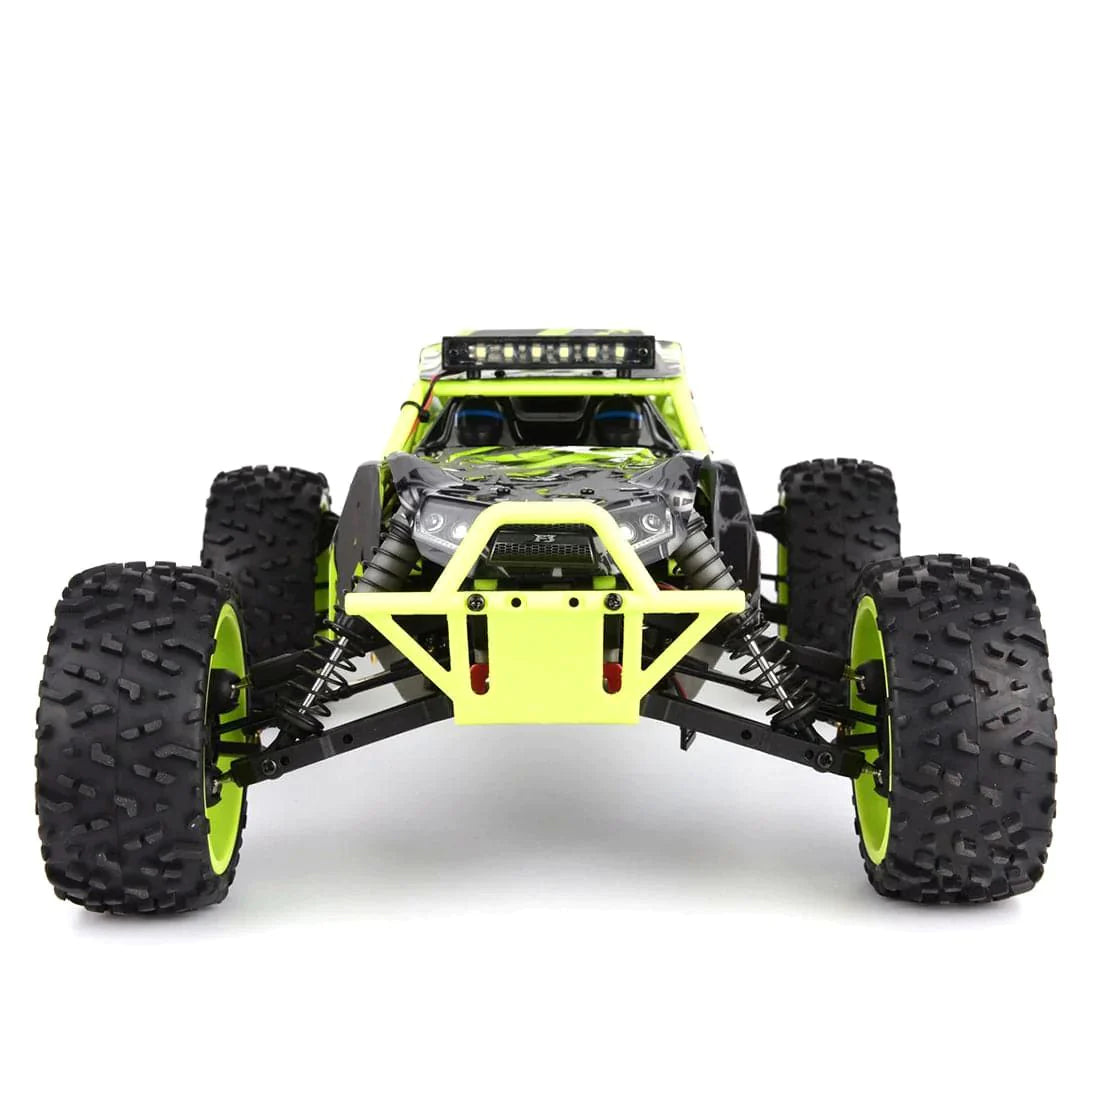 RC Car FS Racing 53608 1/10 4WD High-speed Desert Off-road Vehicle Rally Car